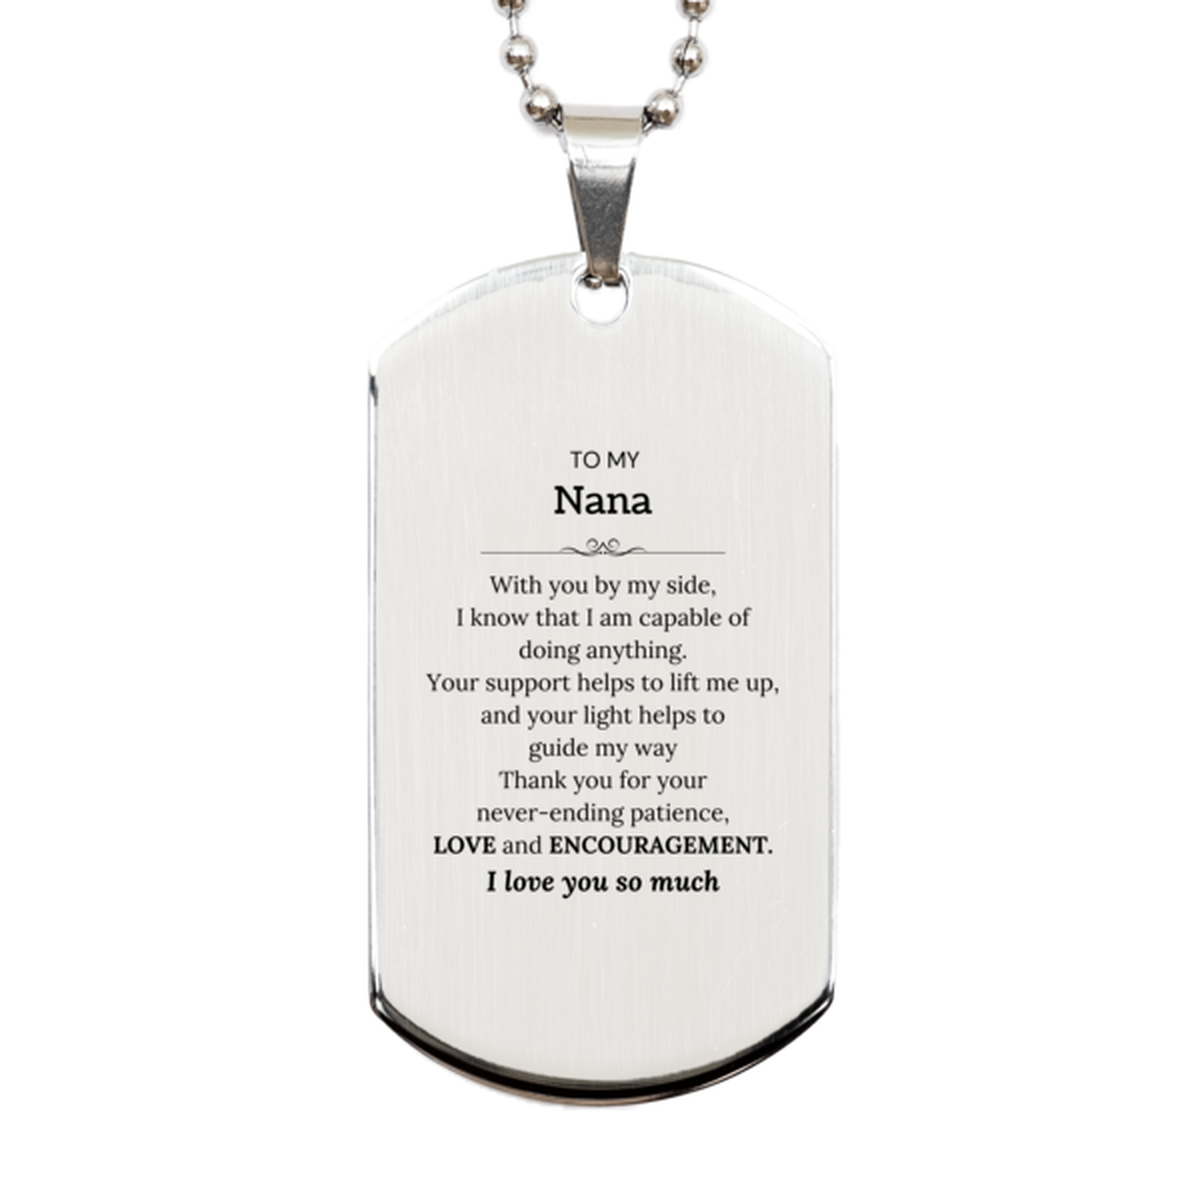 Appreciation Nana Silver Dog Tag Gifts, To My Nana Birthday Christmas Wedding Keepsake Gifts for Nana With you by my side, I know that I am capable of doing anything. I love you so much